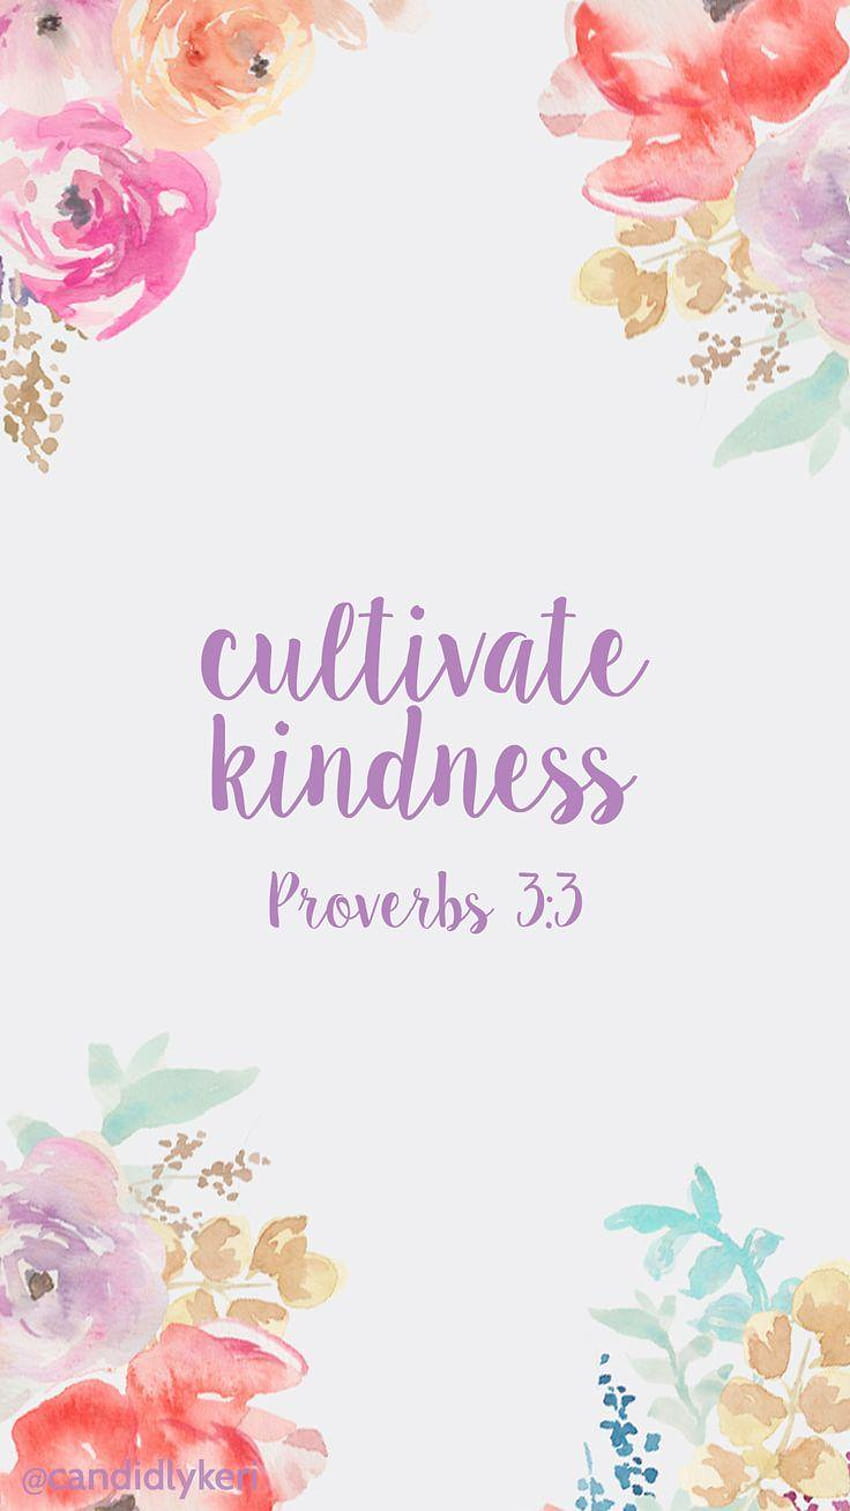 Cultivate kindness pray proverbs 3:3 quote bible backgrounds, pray for the world HD phone wallpaper